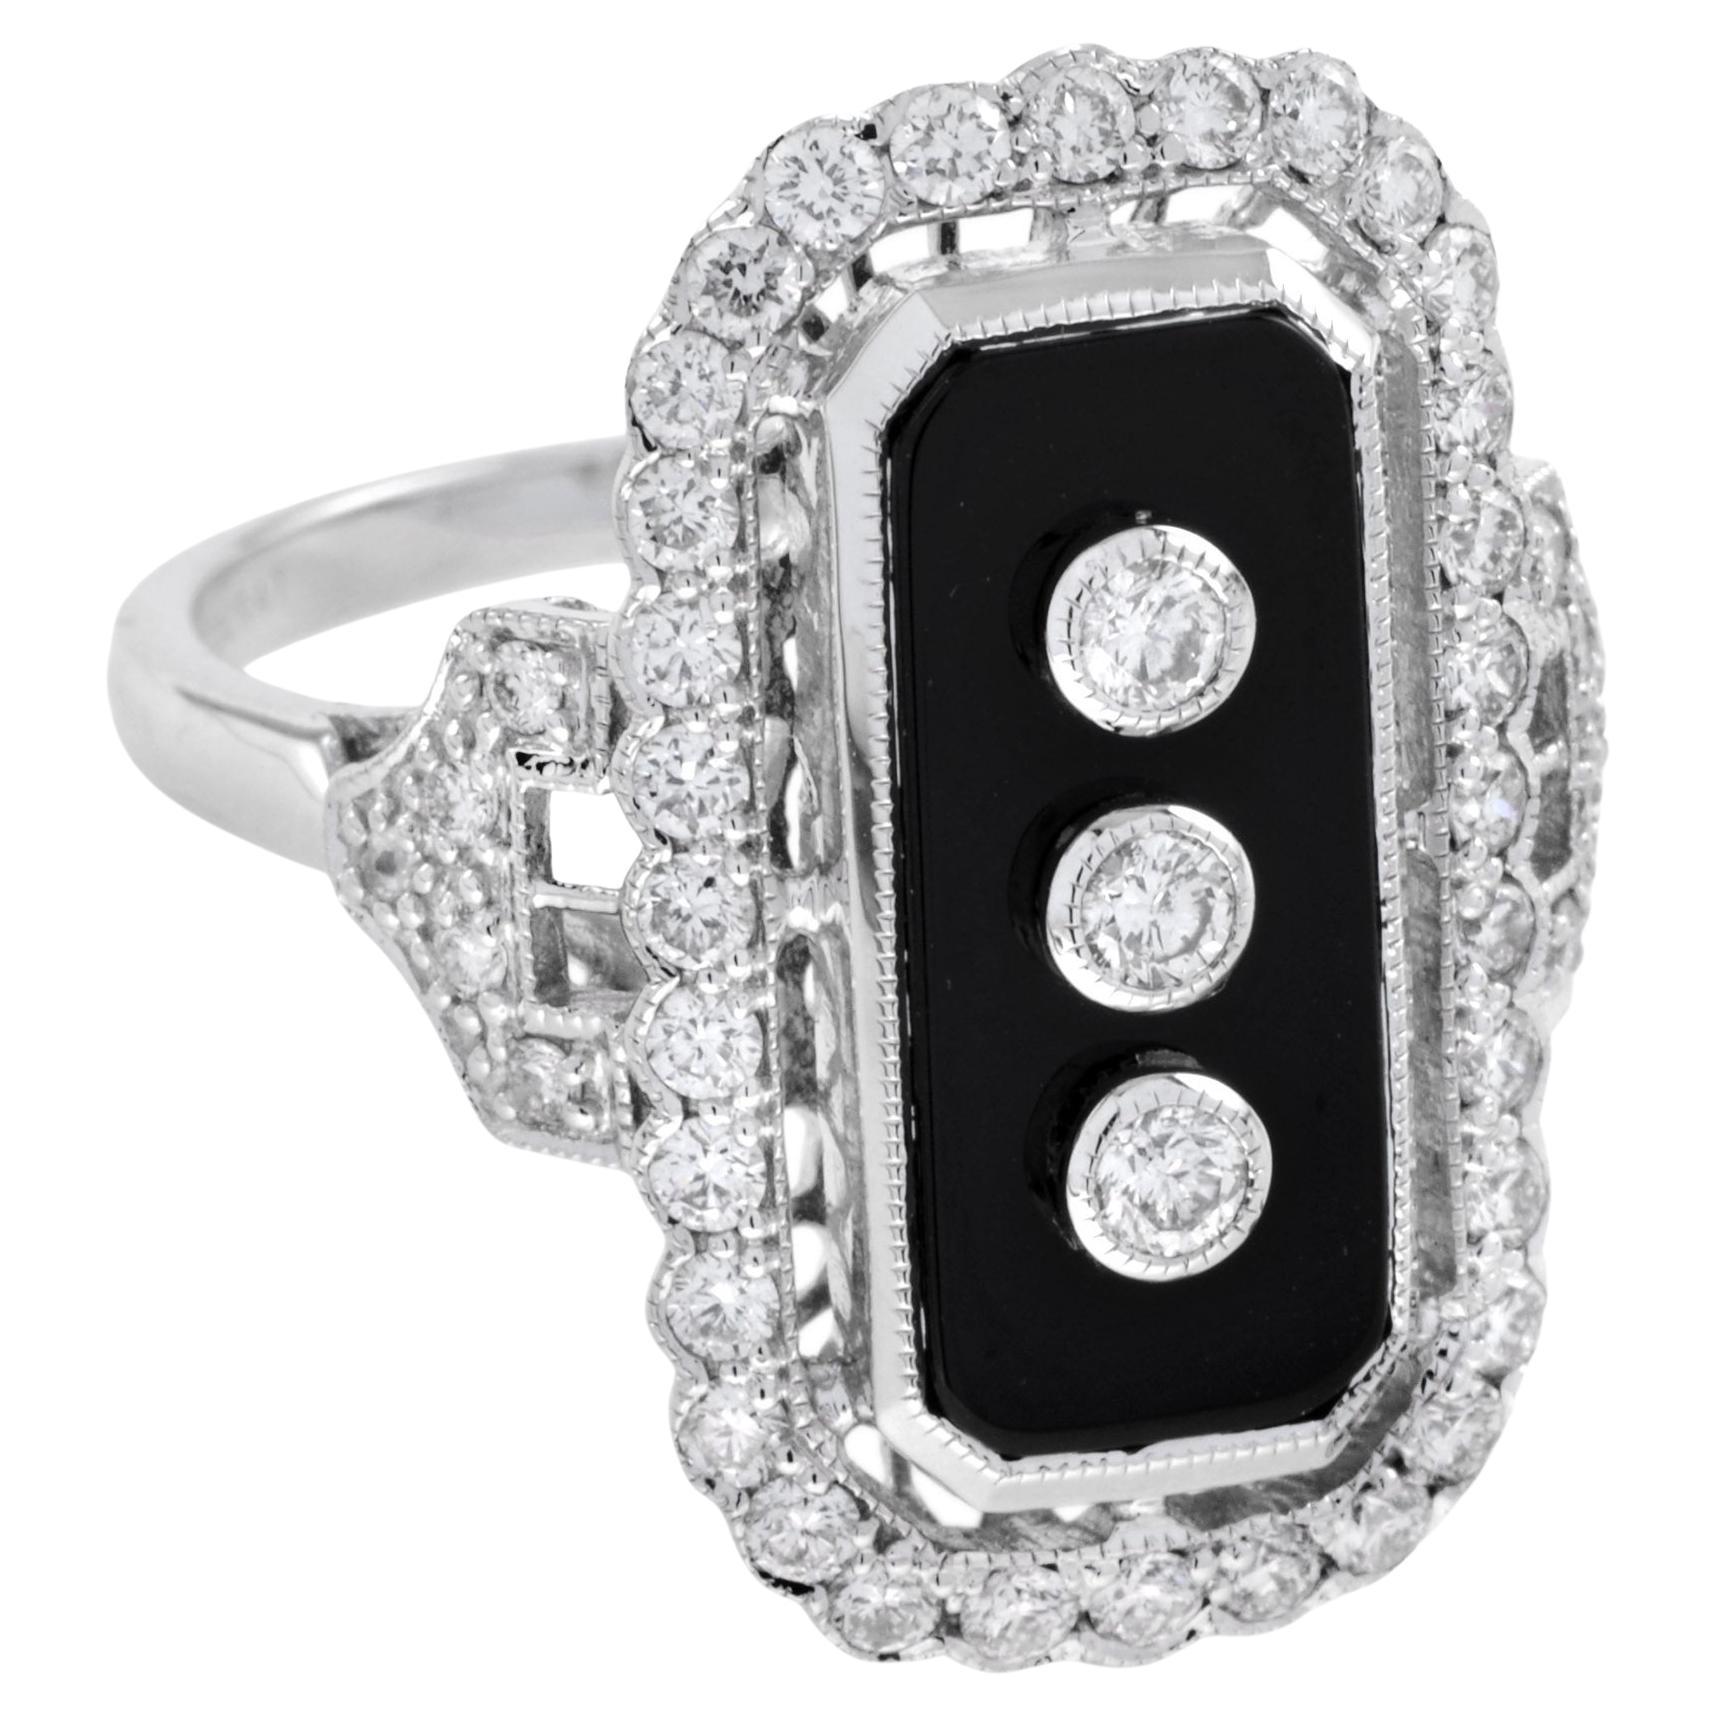 Art Deco Style Diamond and Onyx Ring in 18K White Gold